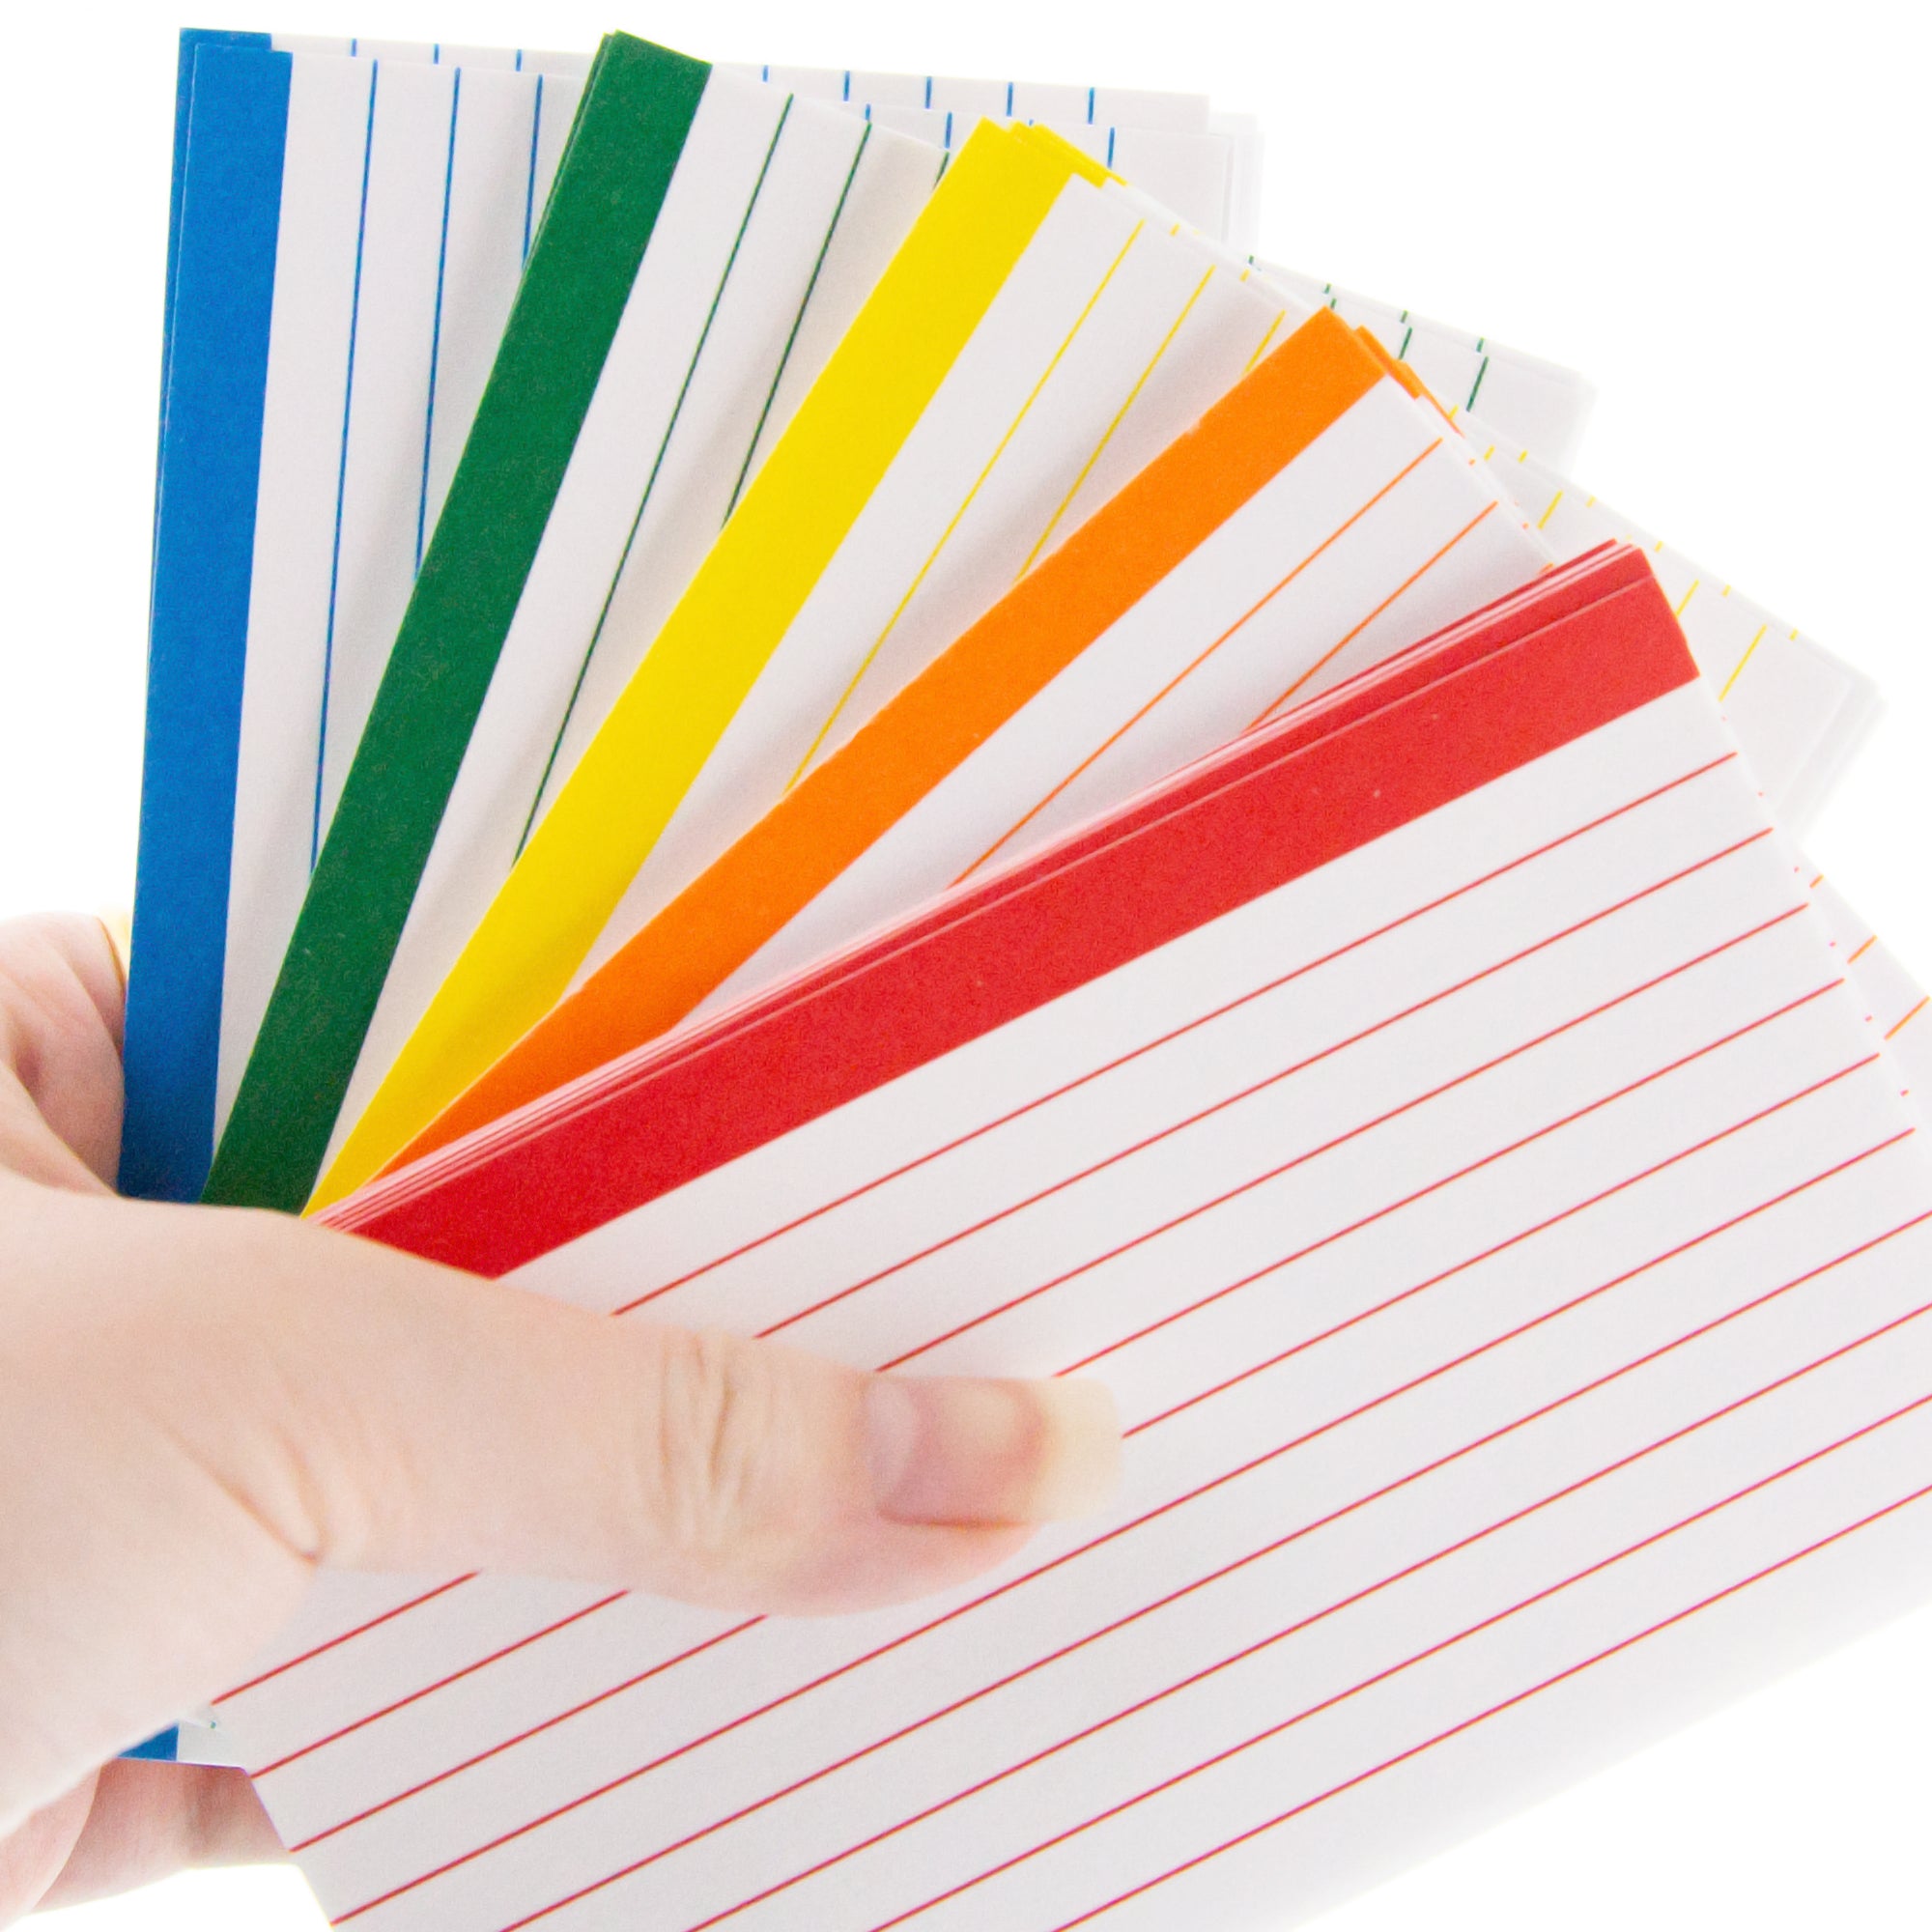 15 Pk) Oxford Color-coded Index Cards 4x6